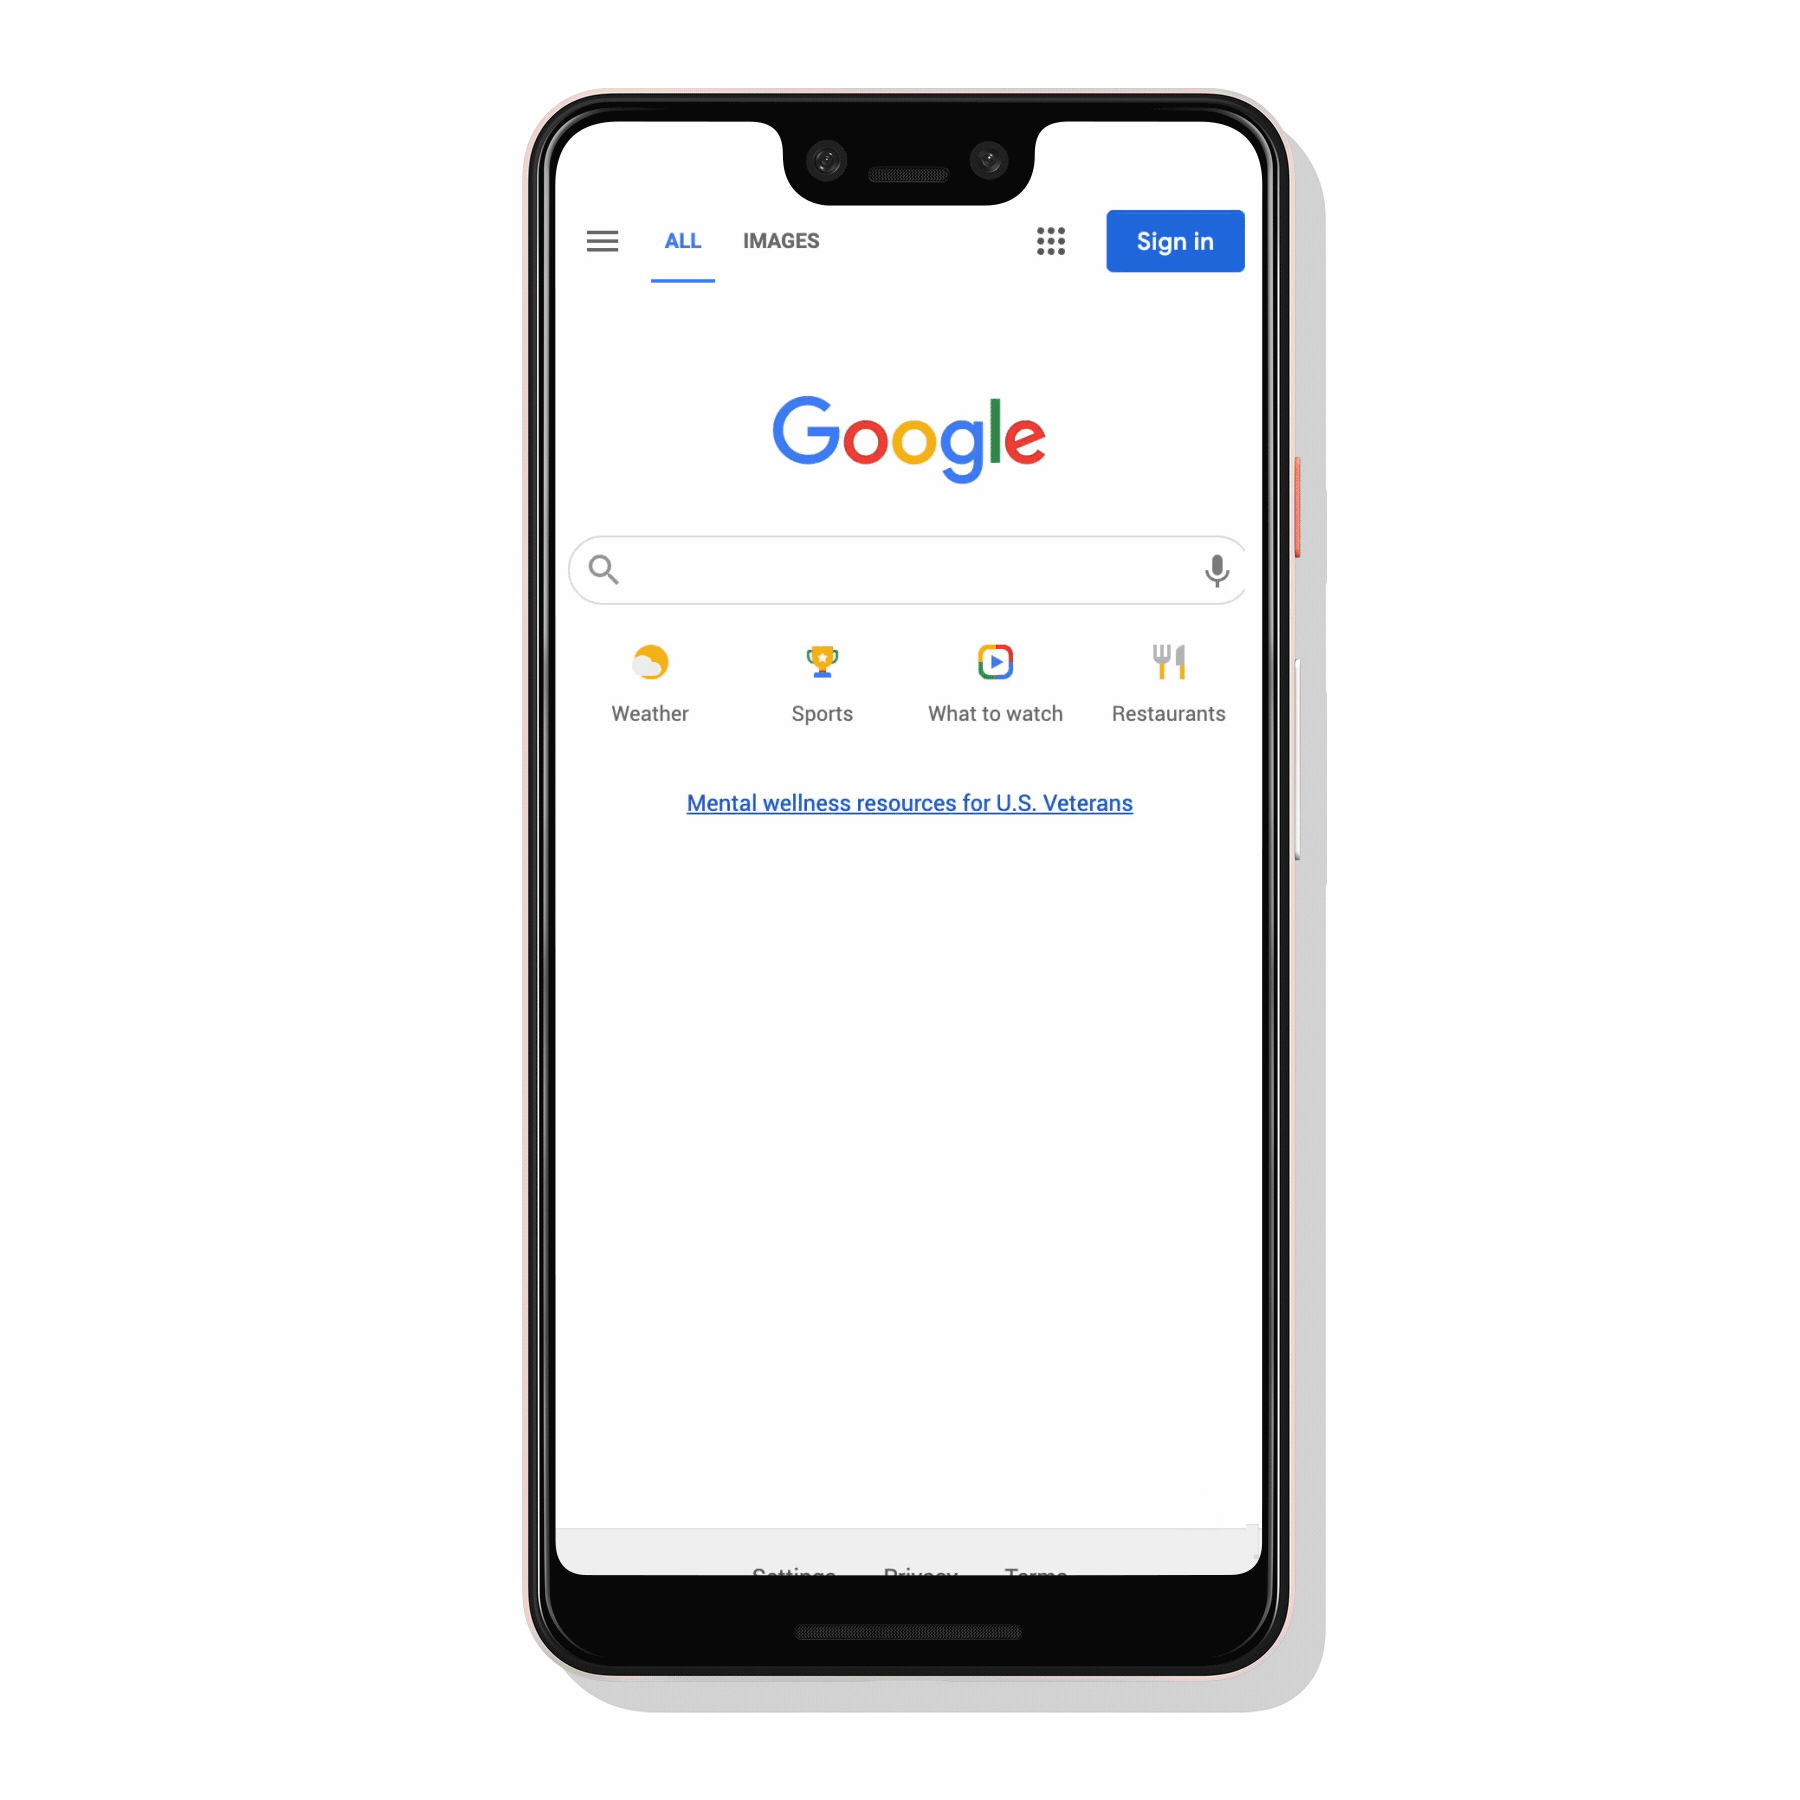 Google Election-Related Features